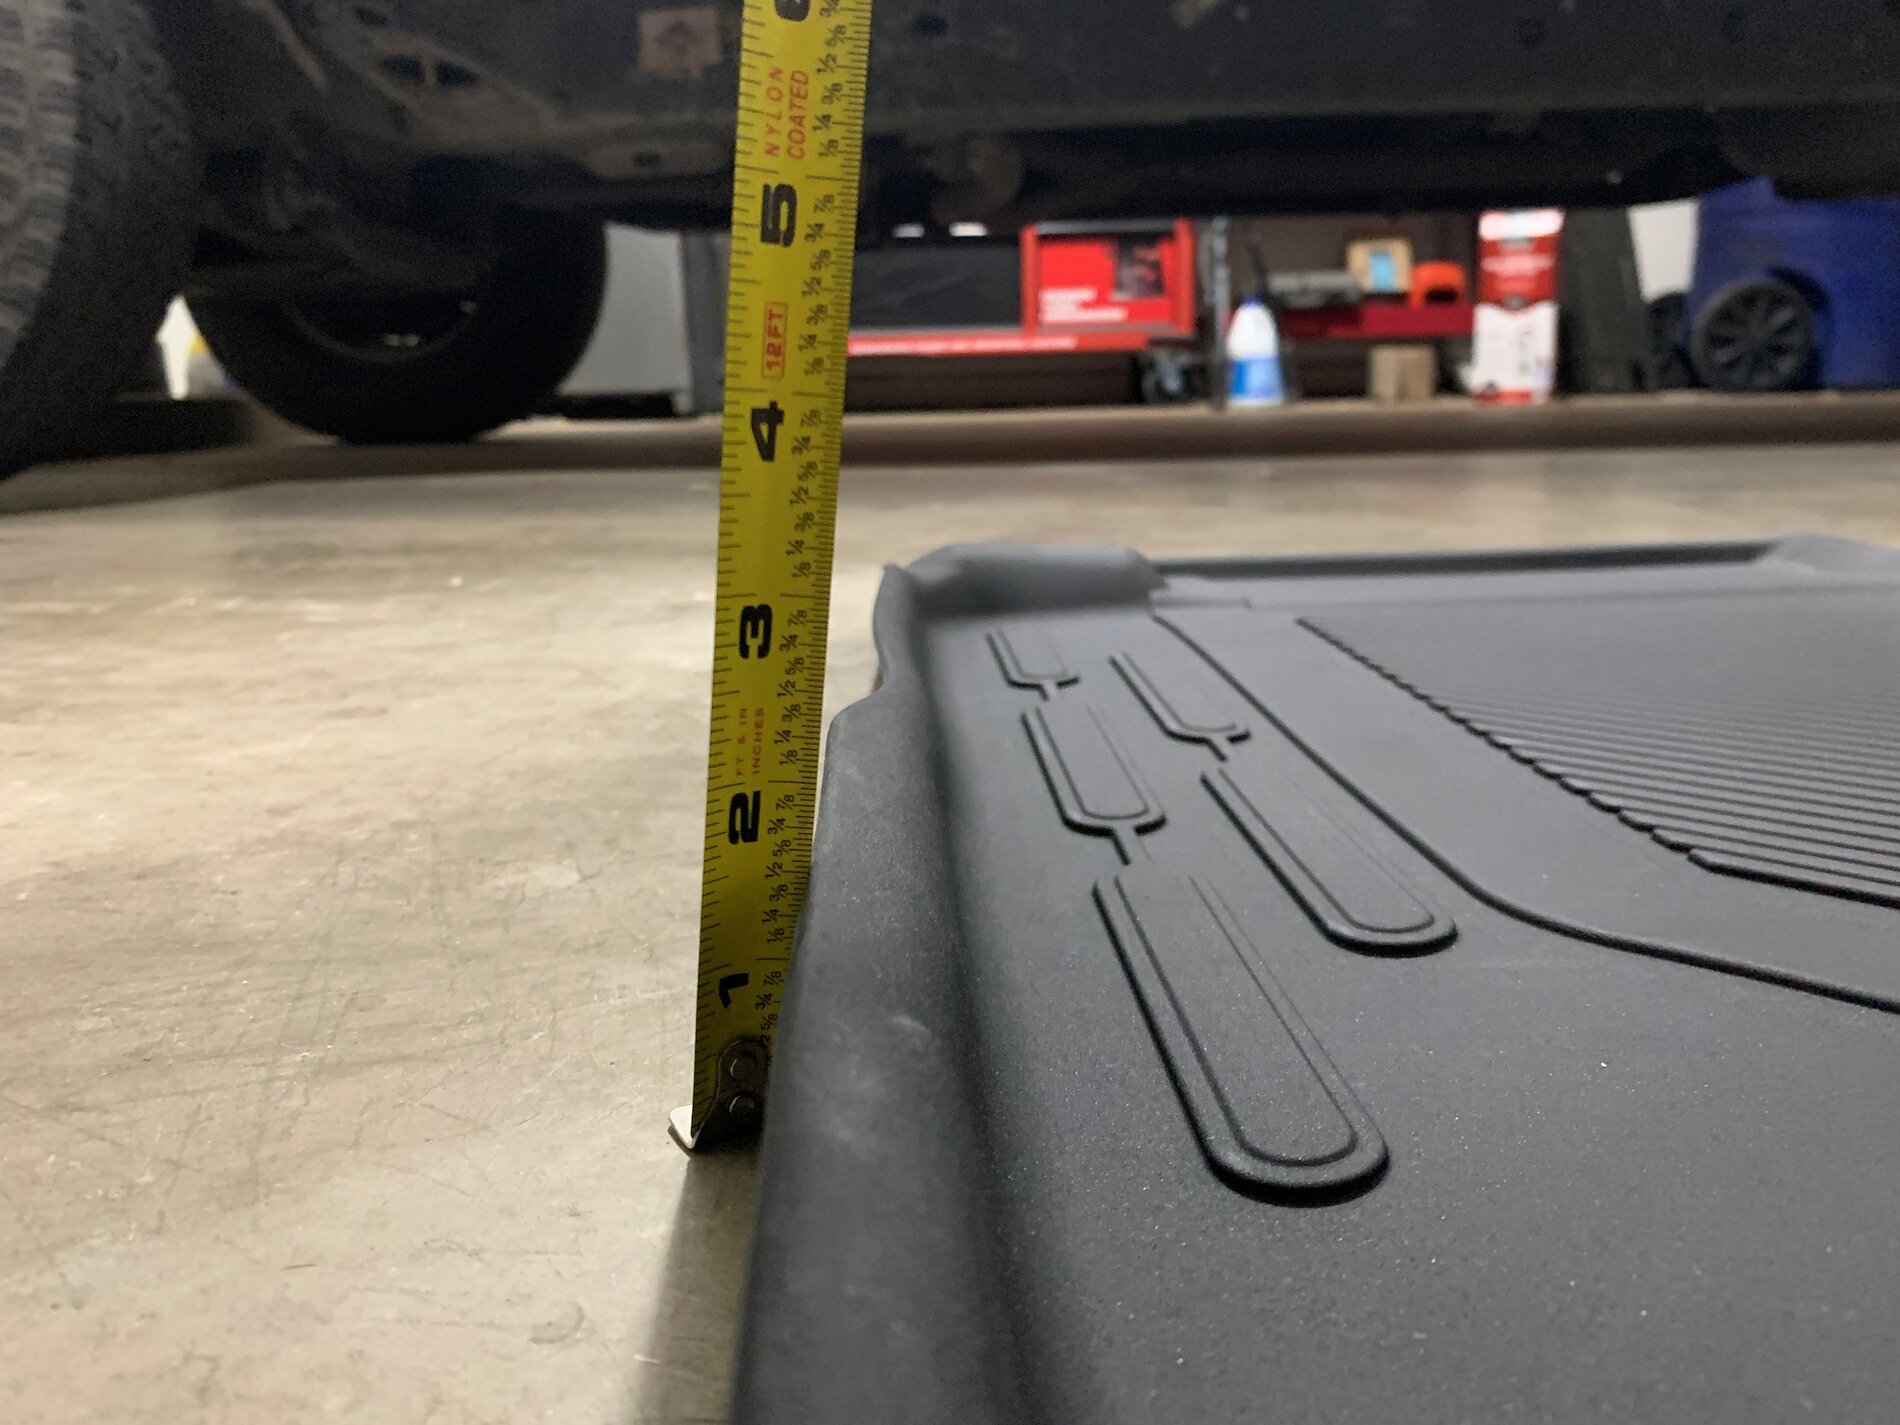 Ford Bronco Ford rubber floor mats are garbage mat2